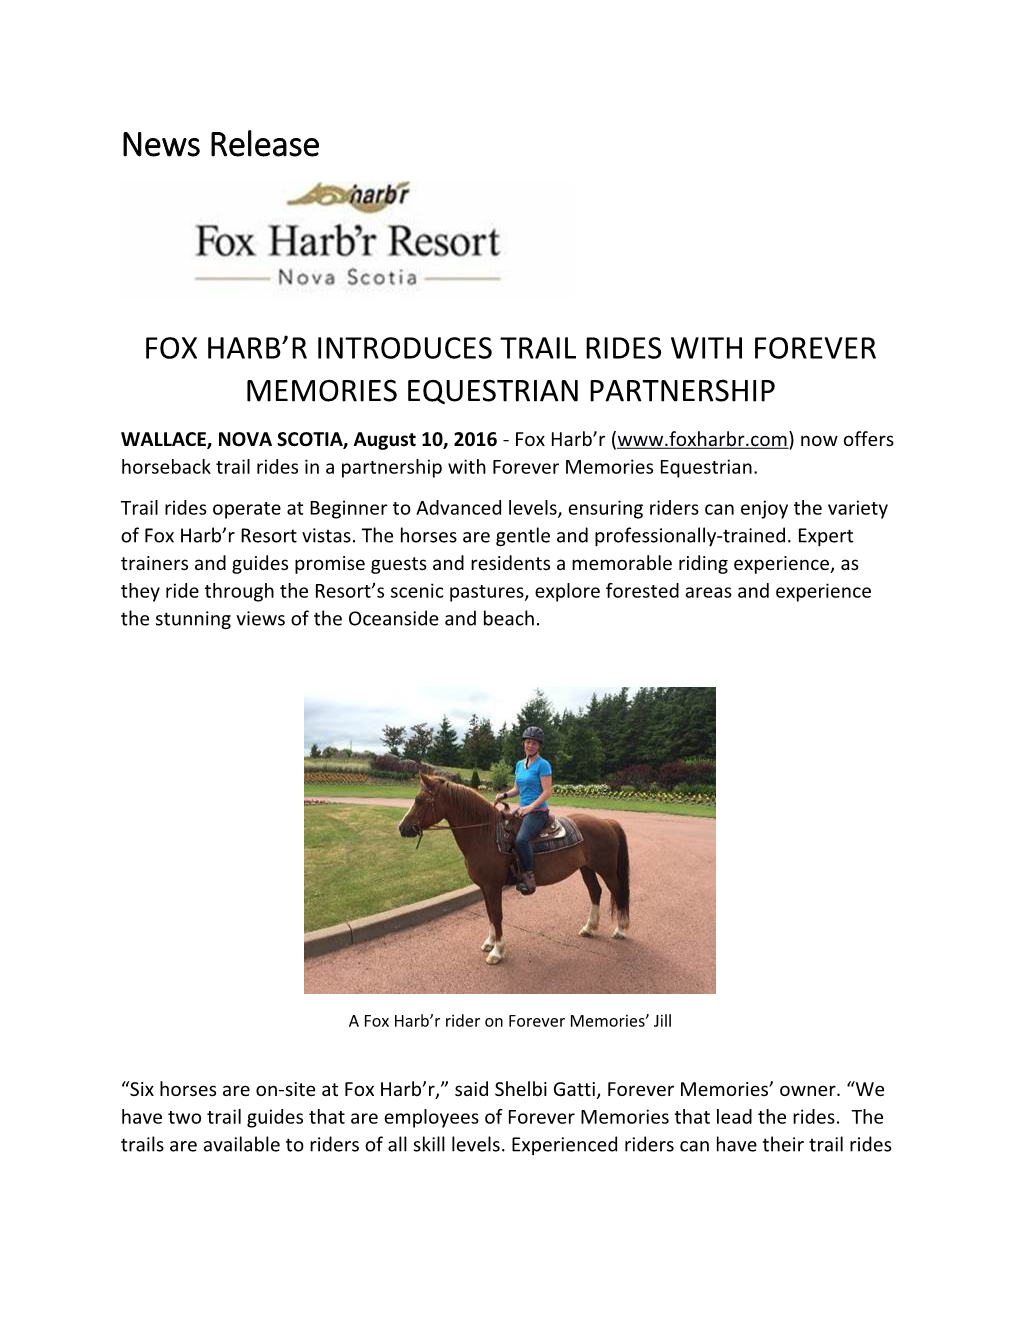 Fox Harb R Introduces Trail Rides with Forever Memories Equestrian Partnership